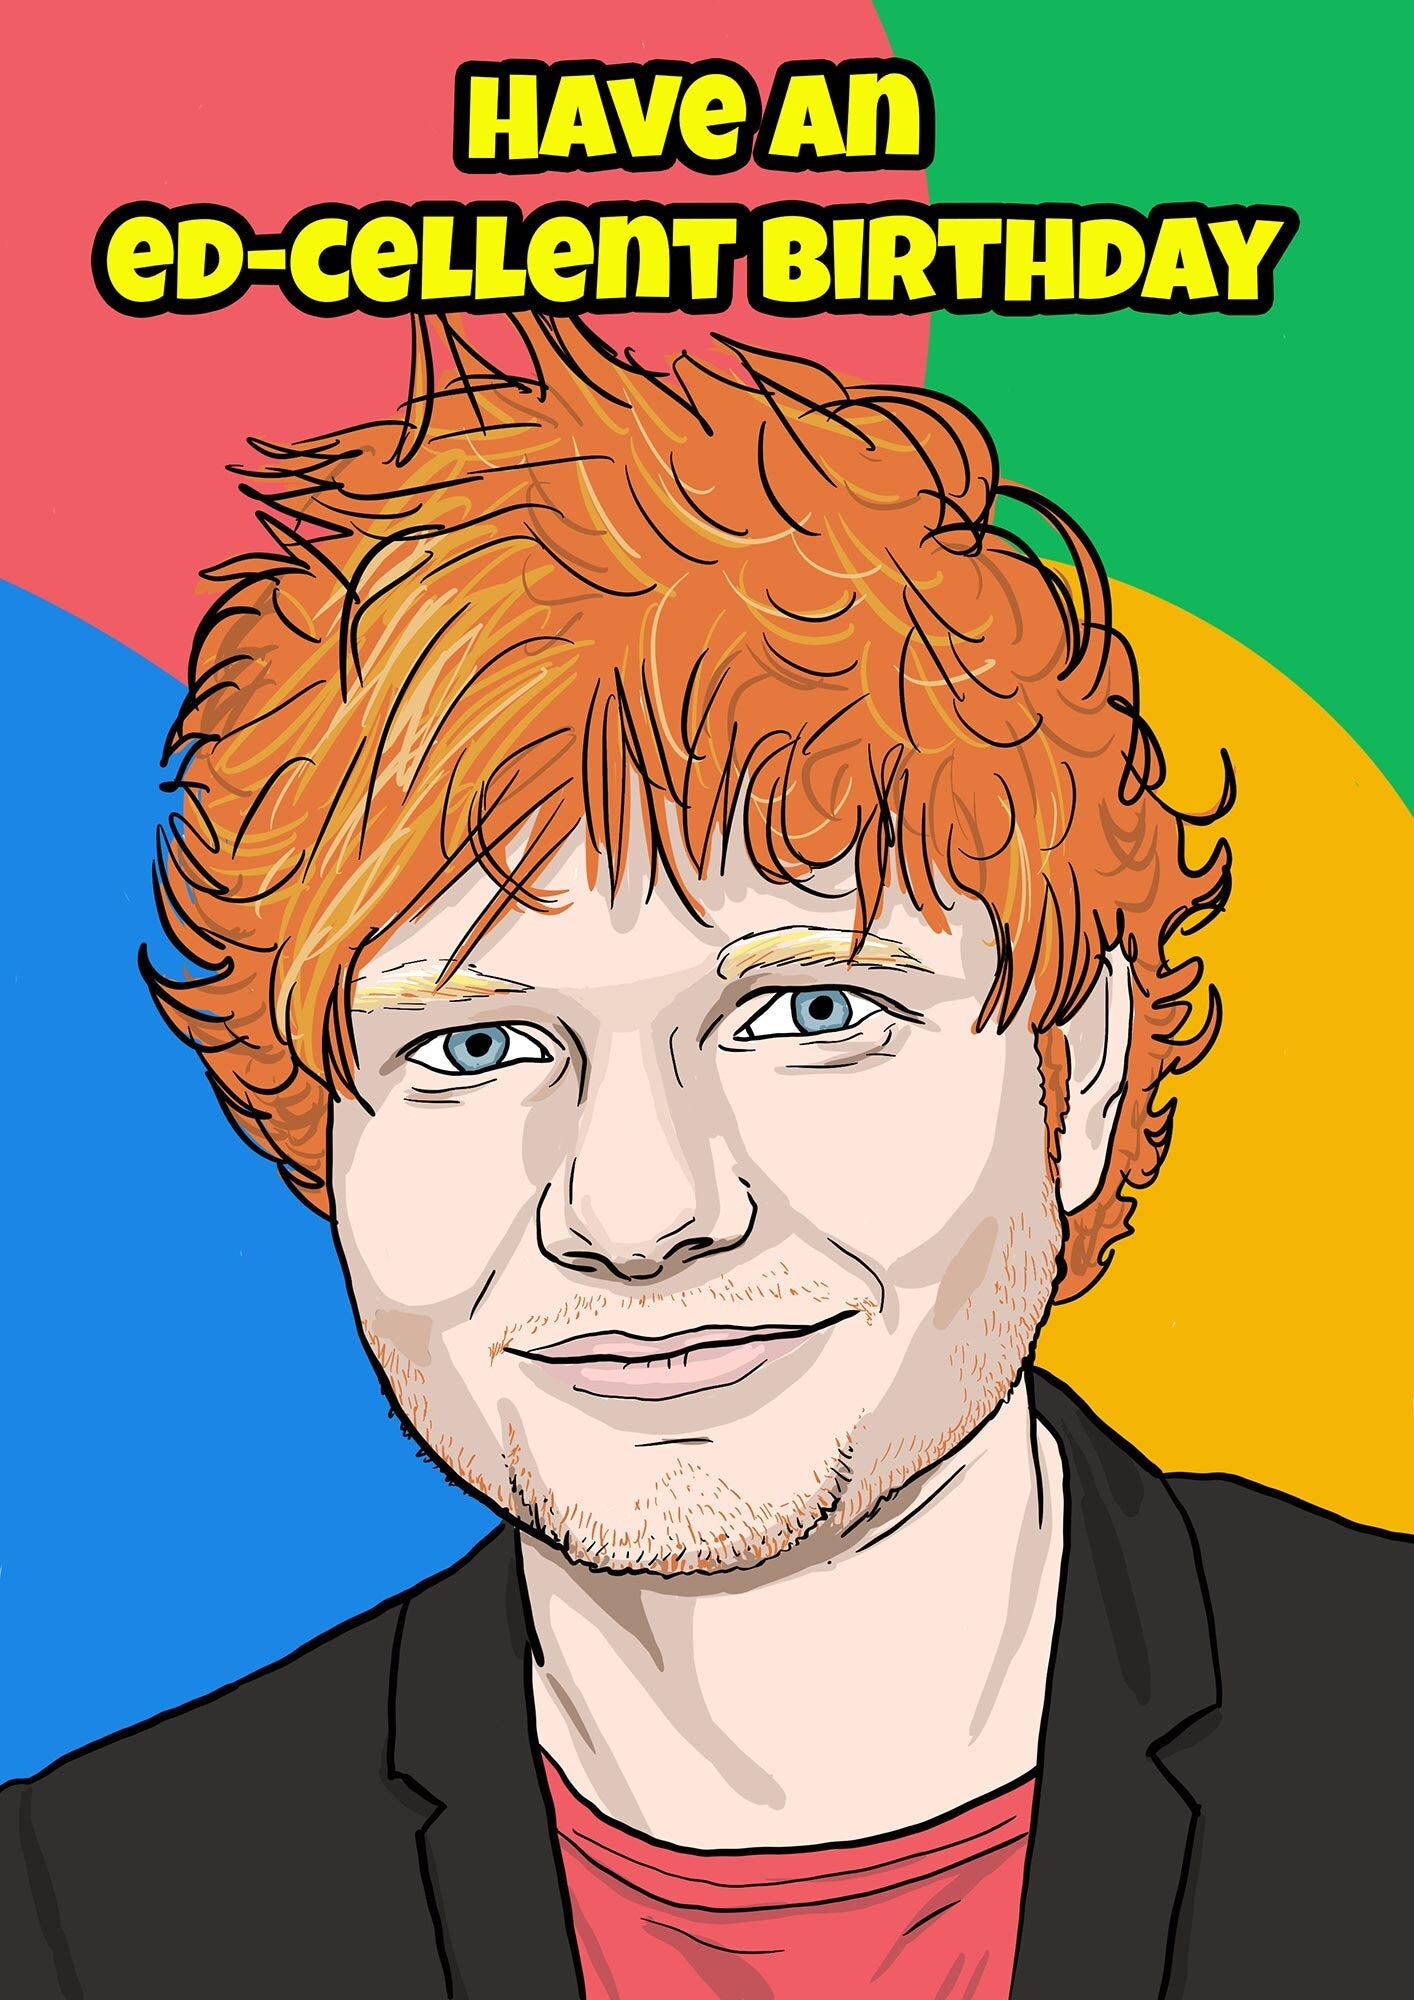 Ed Sheeran birthday card, gift for Ed Sheeran fan, greeting card for music fans, music birthday gift, personalised card